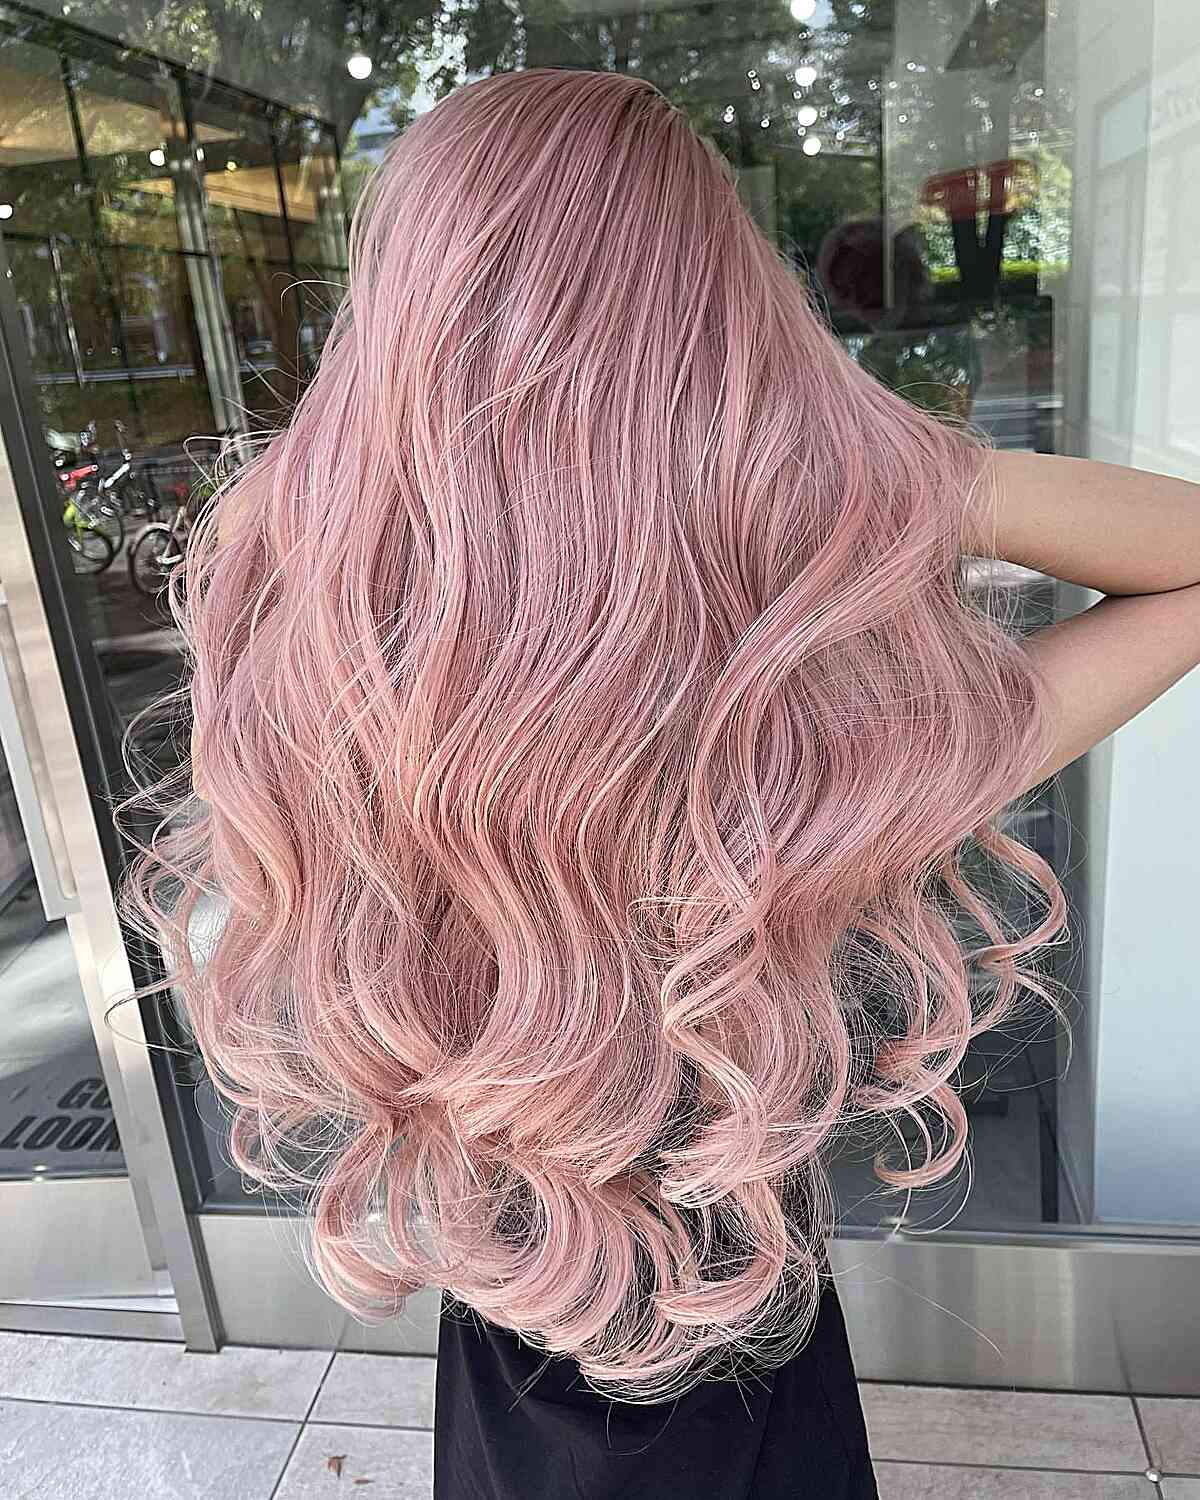 Long Pastel Pink Fine Hair with wispy ends